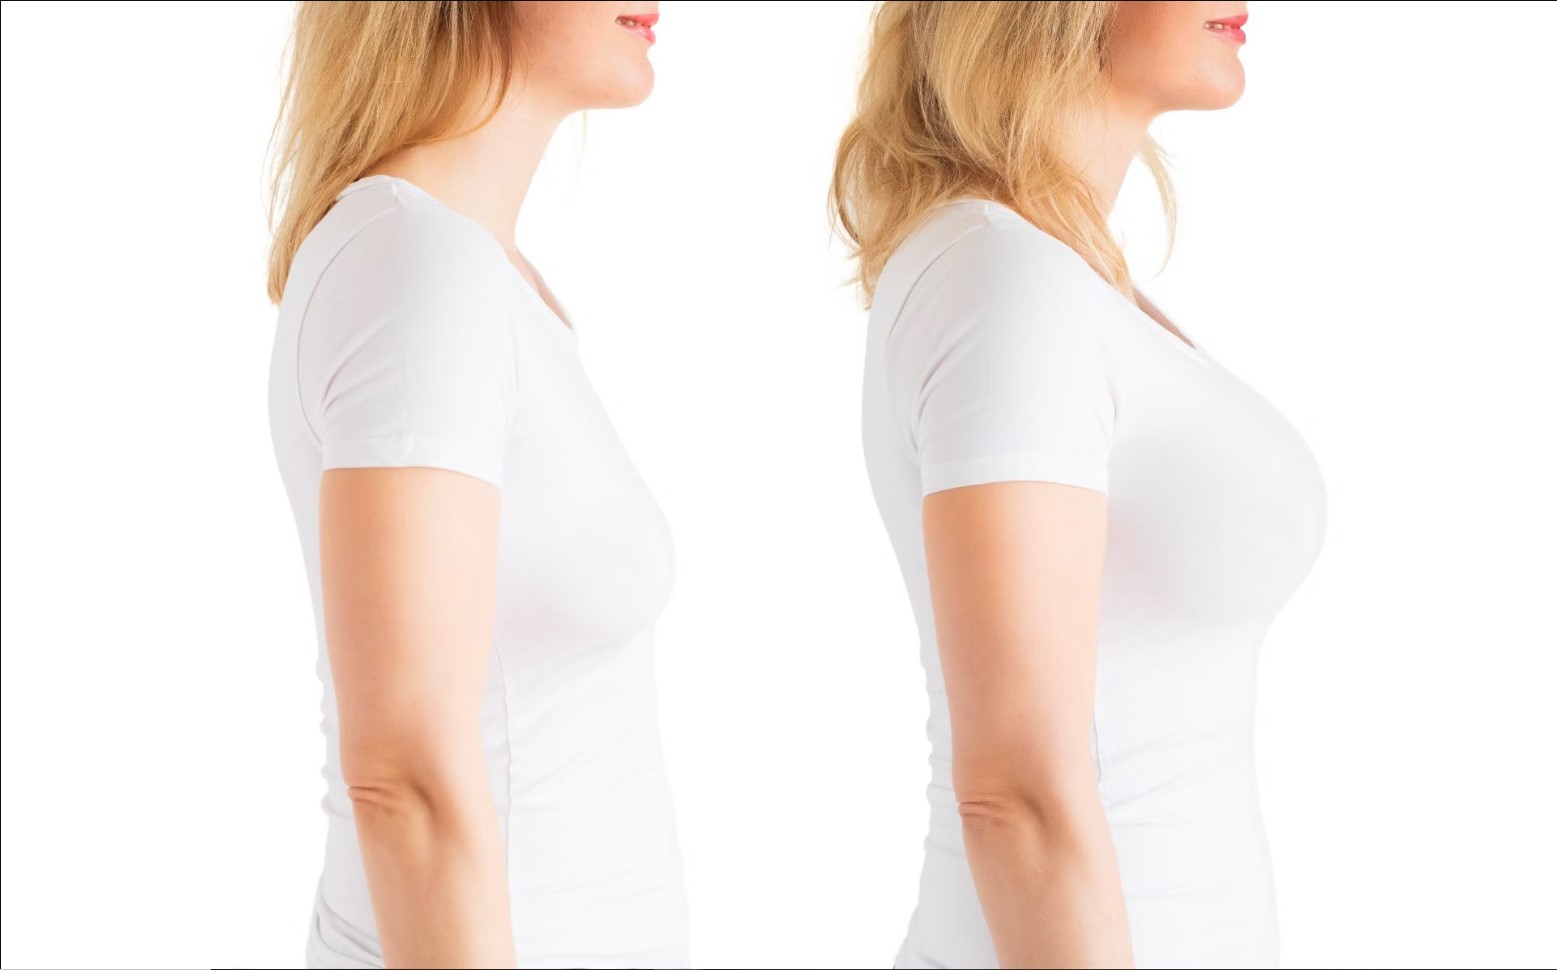 How Much Does an AirSculpt Breast Fat Transfer Cost?